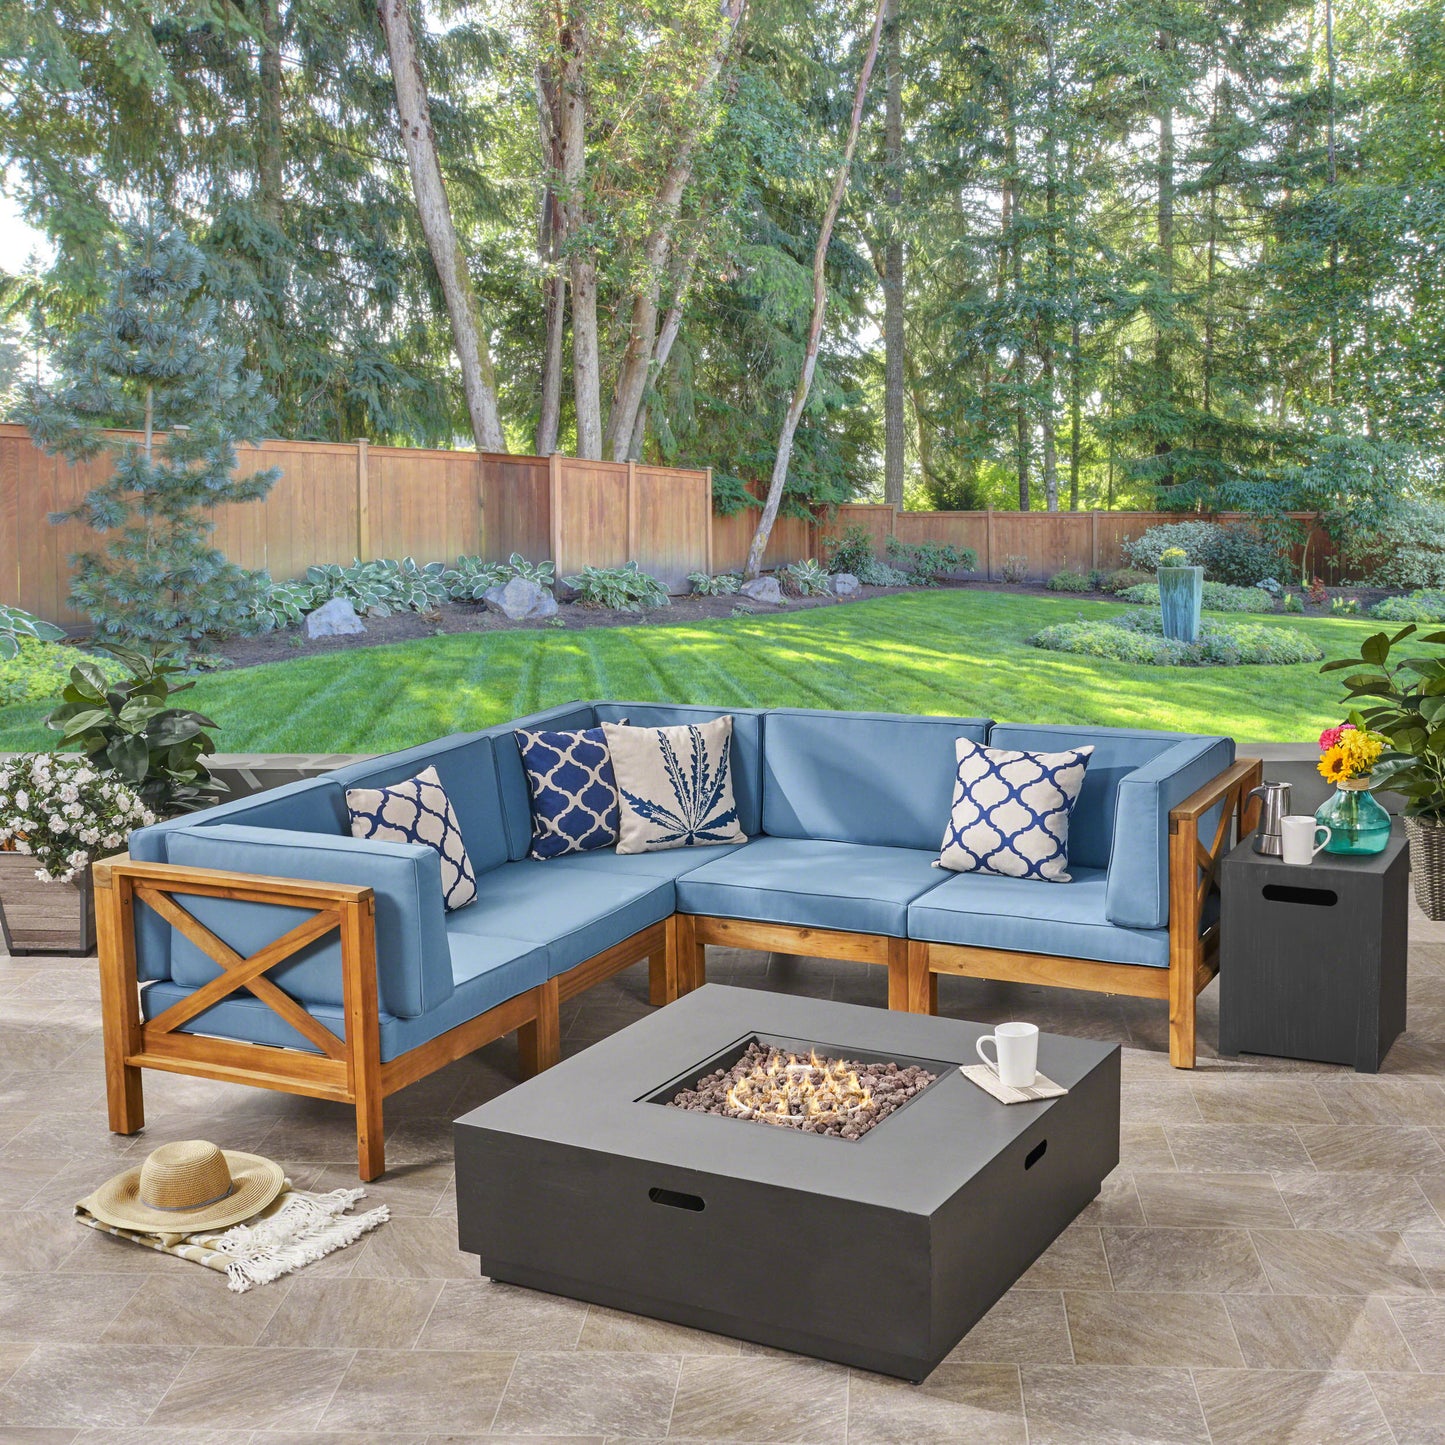 Gina Outdoor Acacia Wood 5 Seater Sectional Sofa Set with Fire Pit